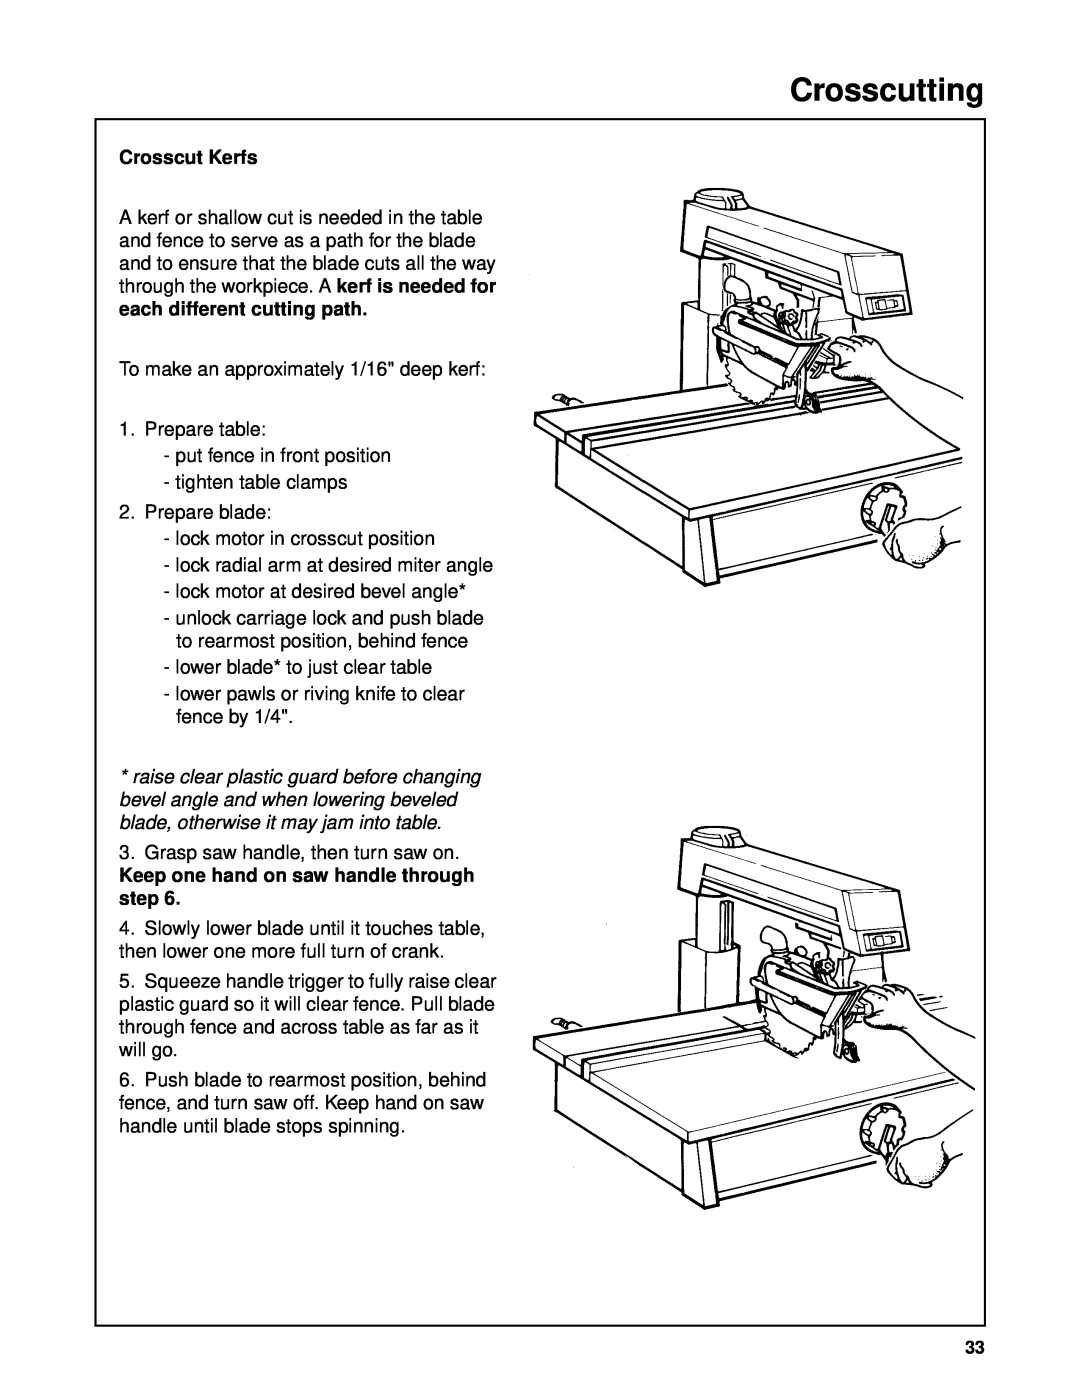 Craftsman 509398, 509399 owner manual Crosscutting, Crosscut Kerfs, Keep one hand on saw handle through step 